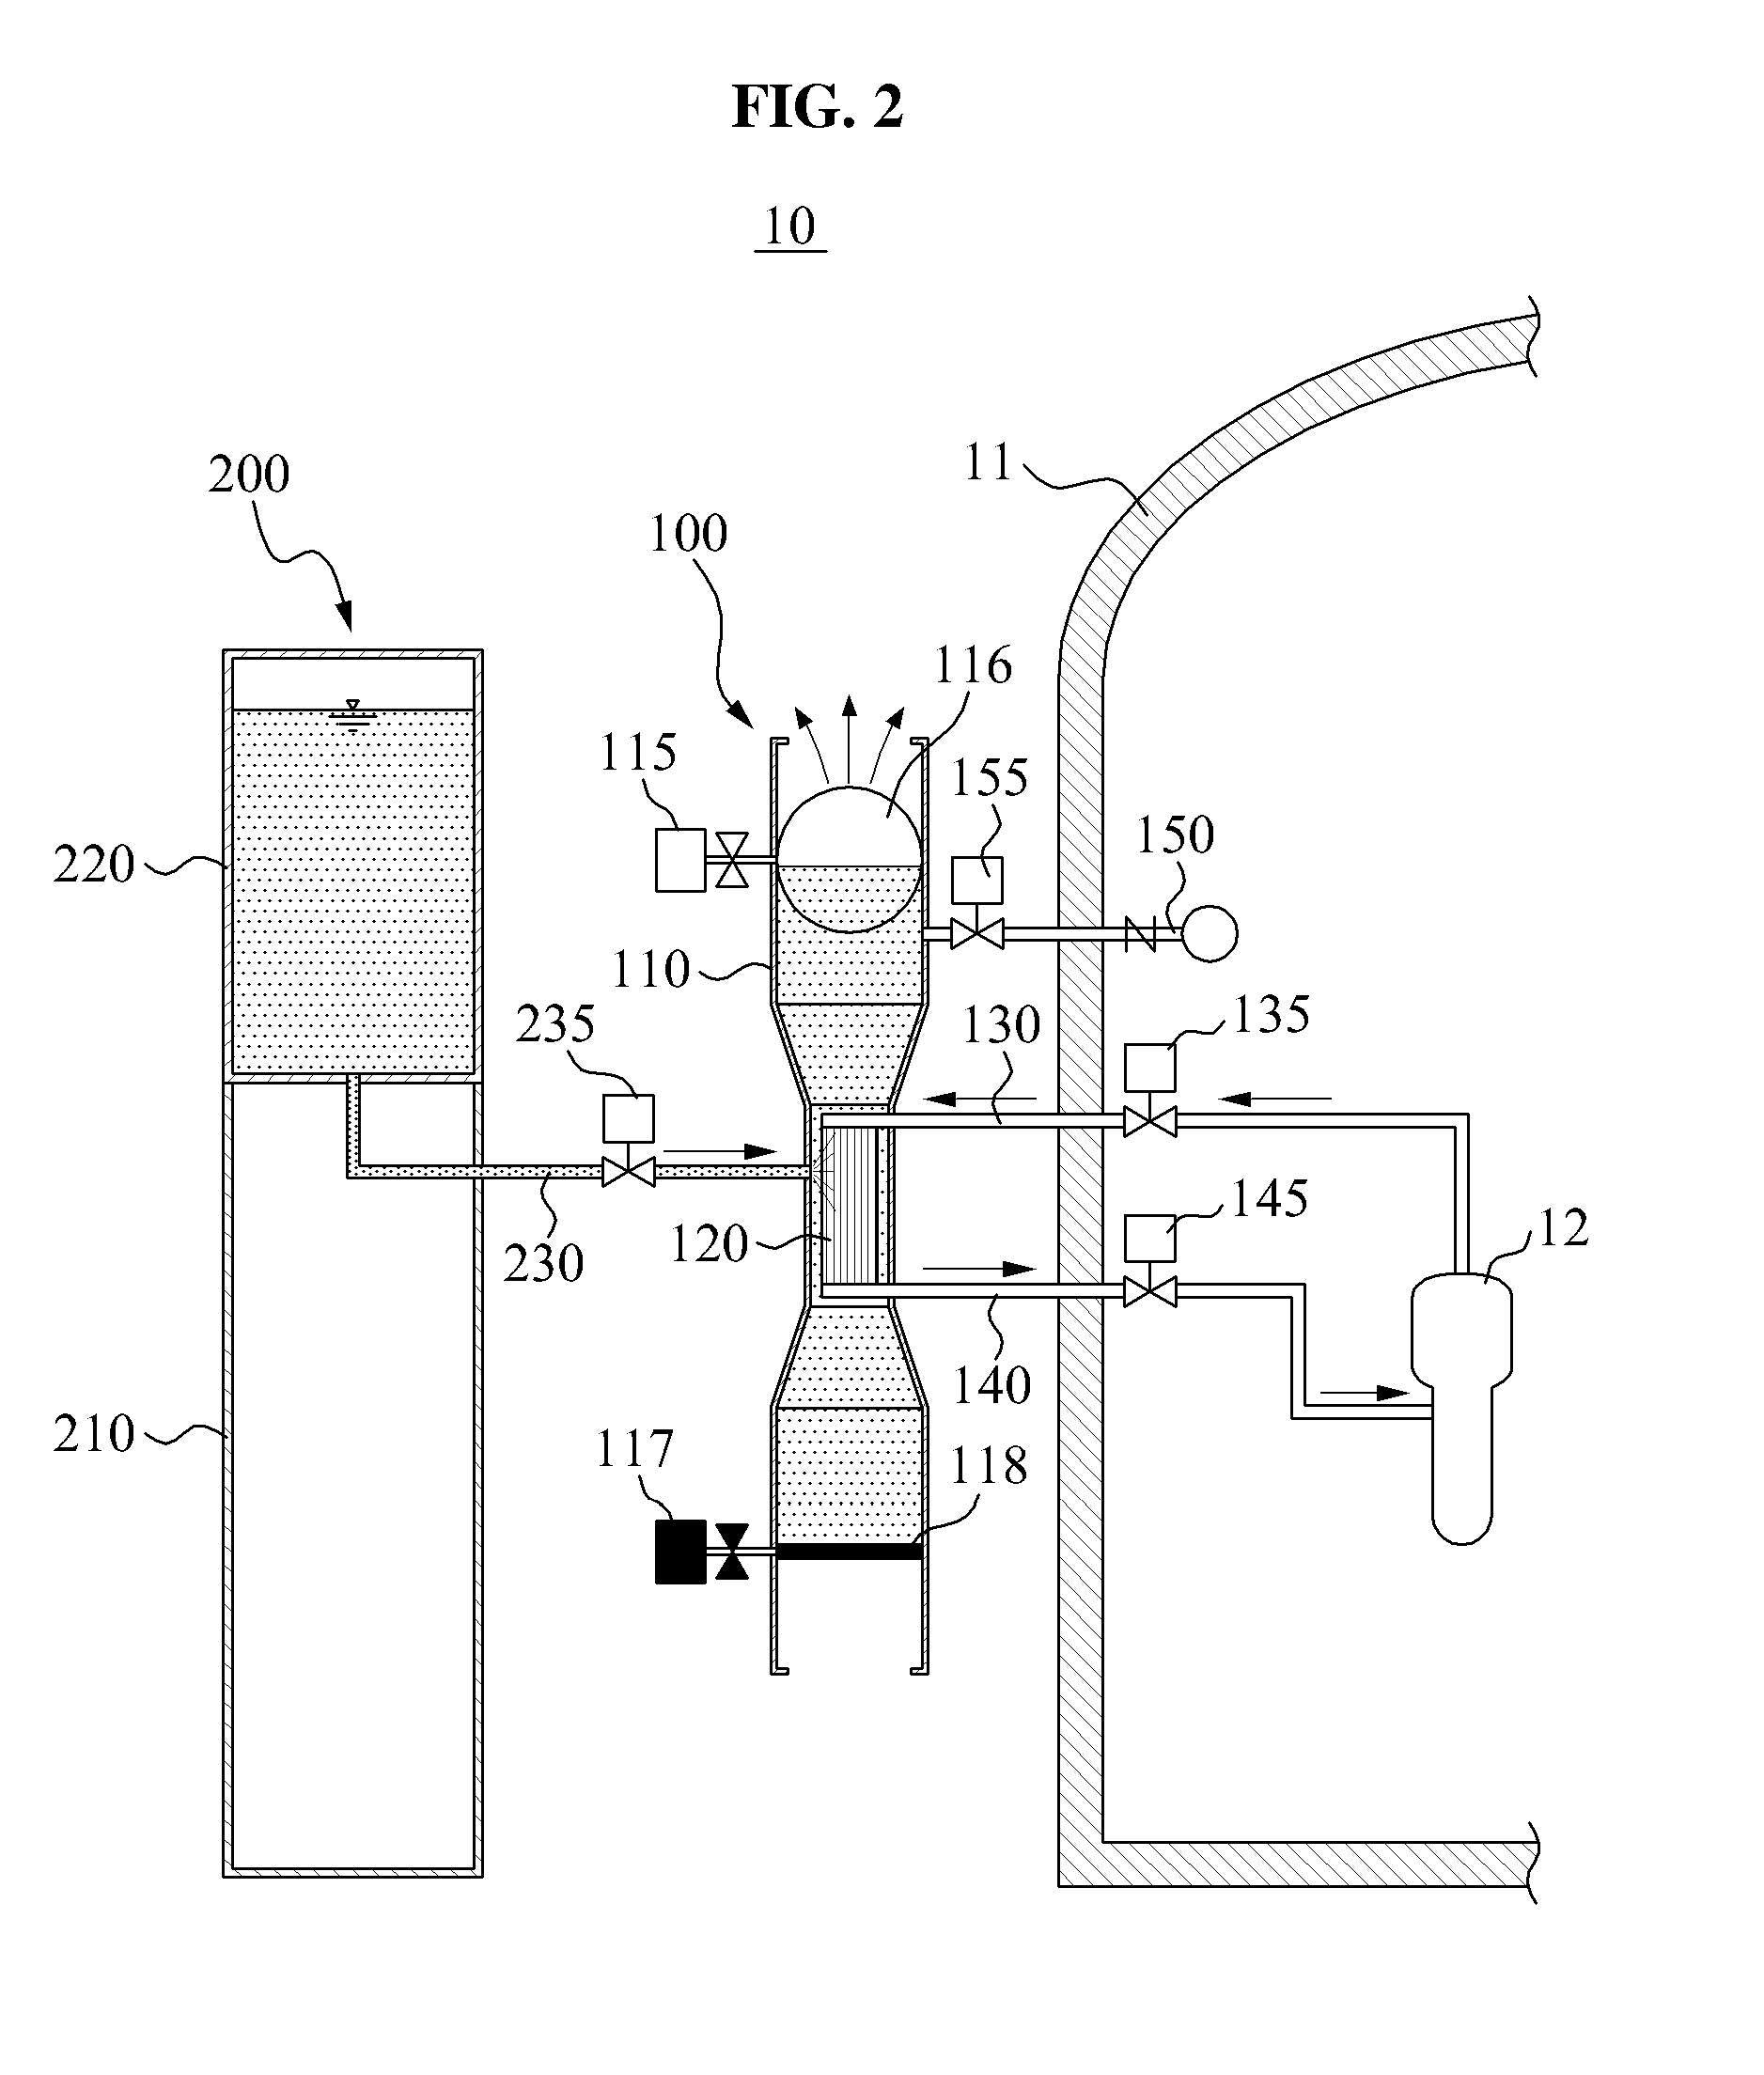 Water-spray residual heat removal system for nuclear power plant